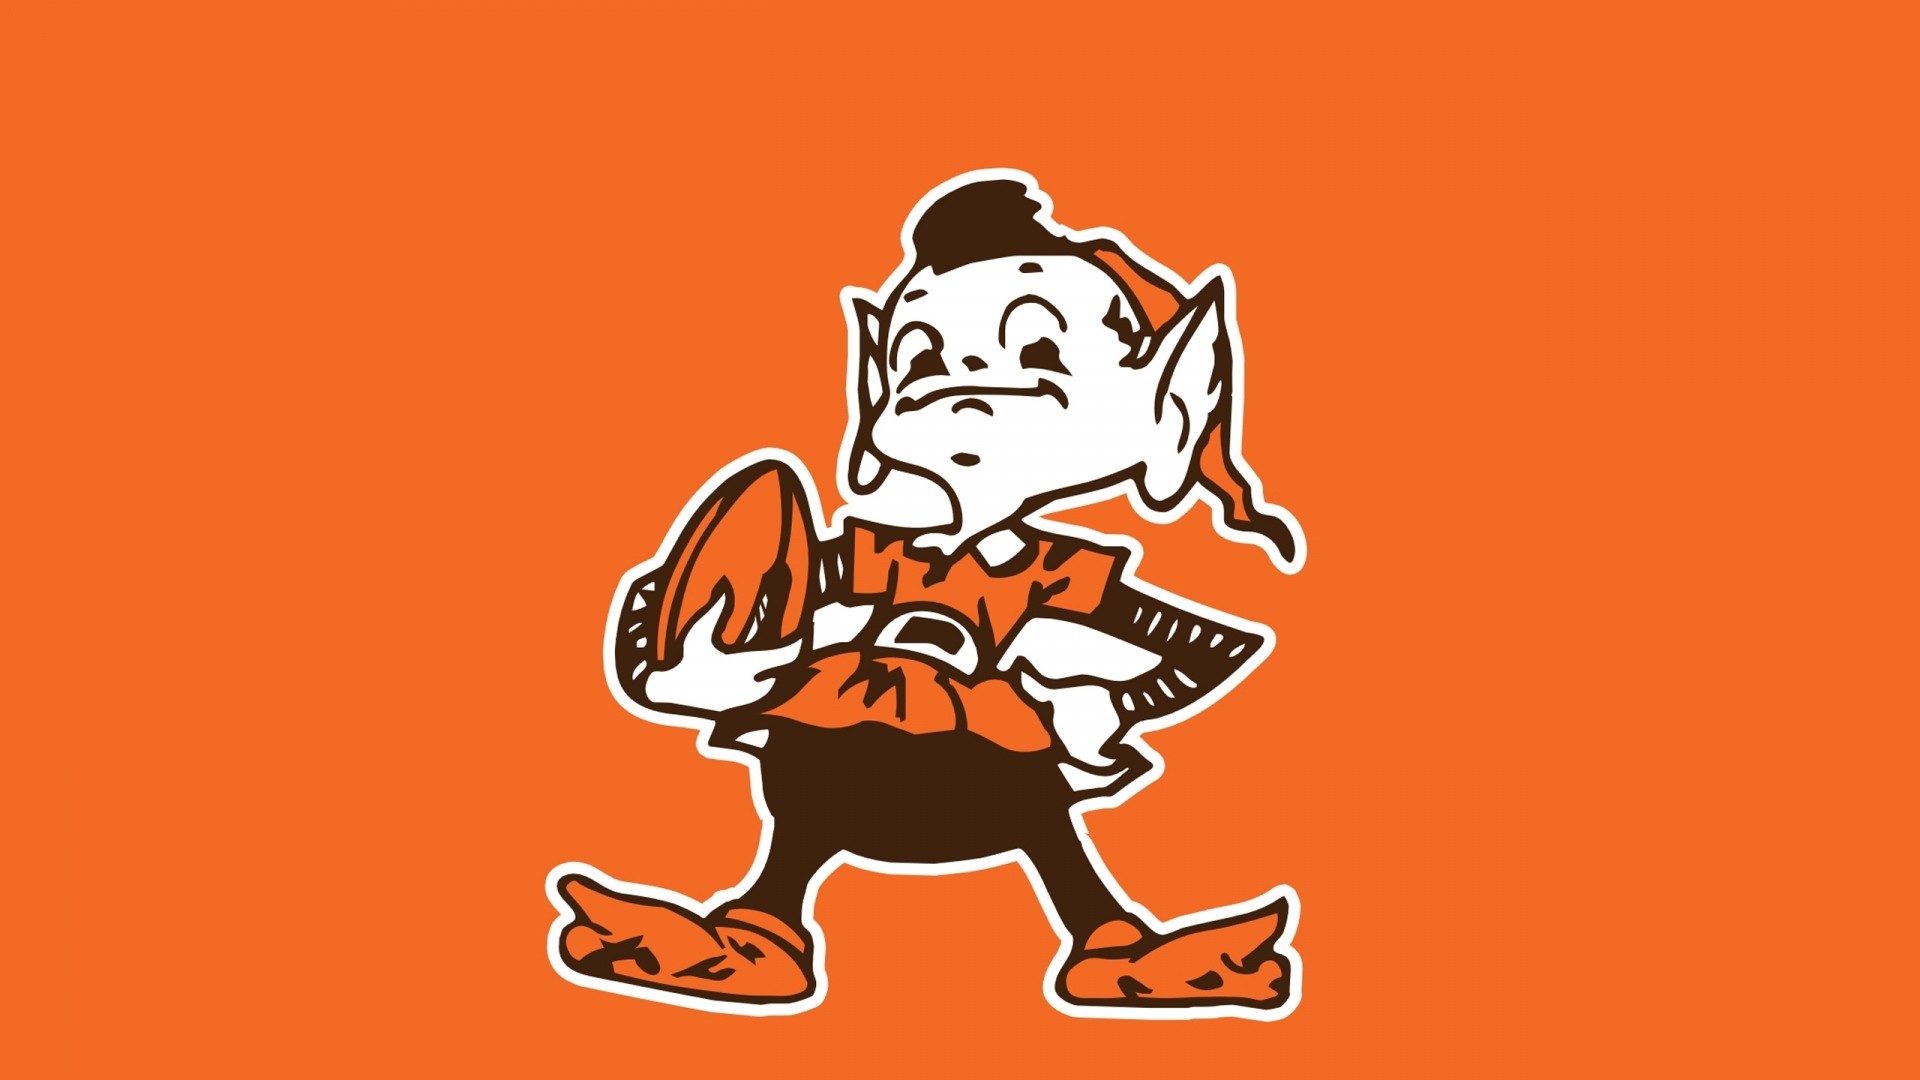 1920x1080 Cleveland Browns Wallpaper, Cleveland Browns Wallpapers and